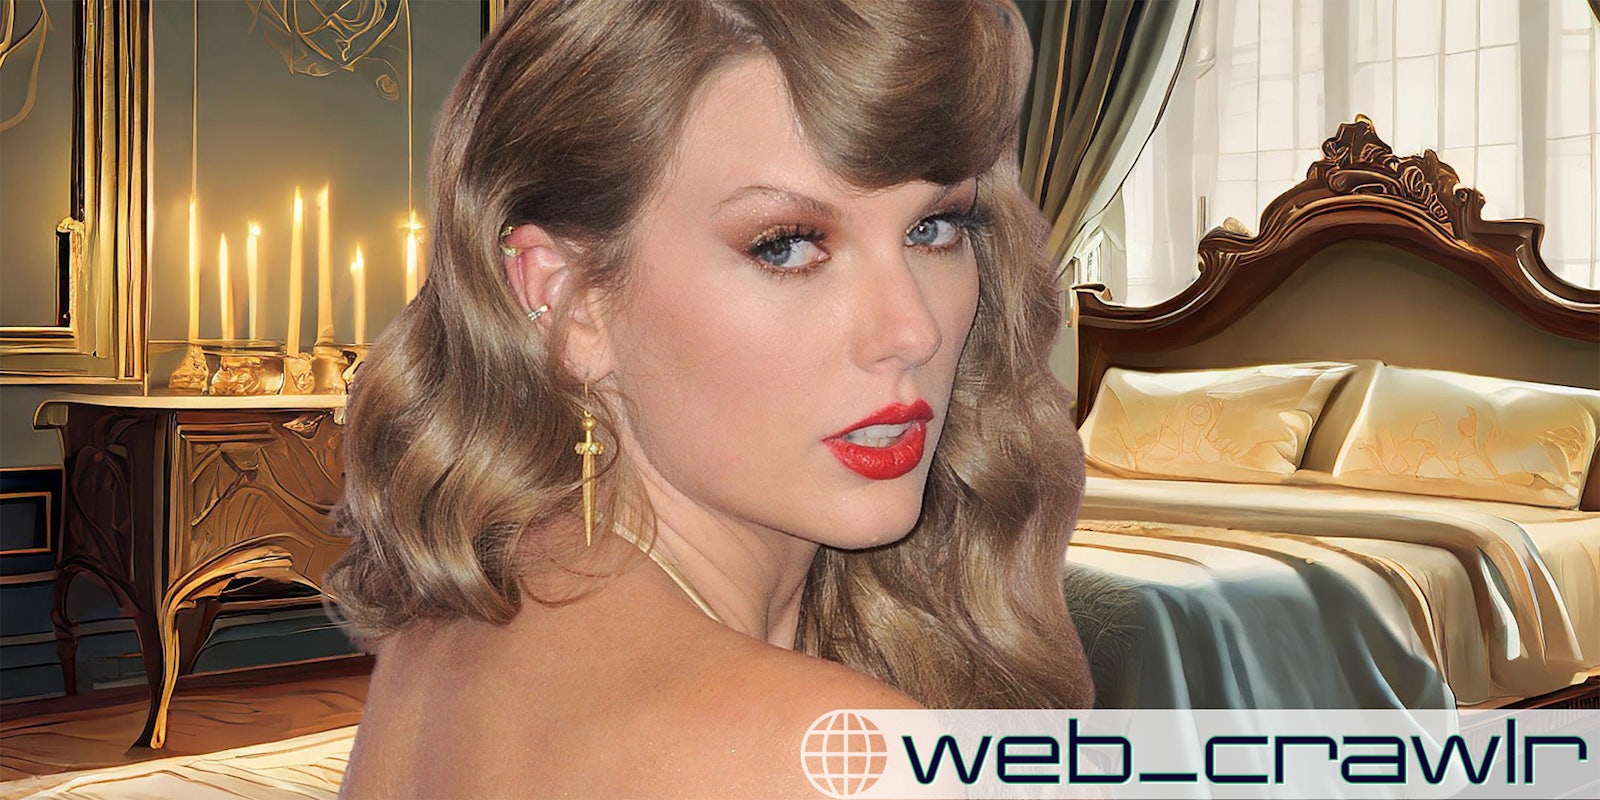 X finally cracked down on explicit AI photos of Taylor Swift